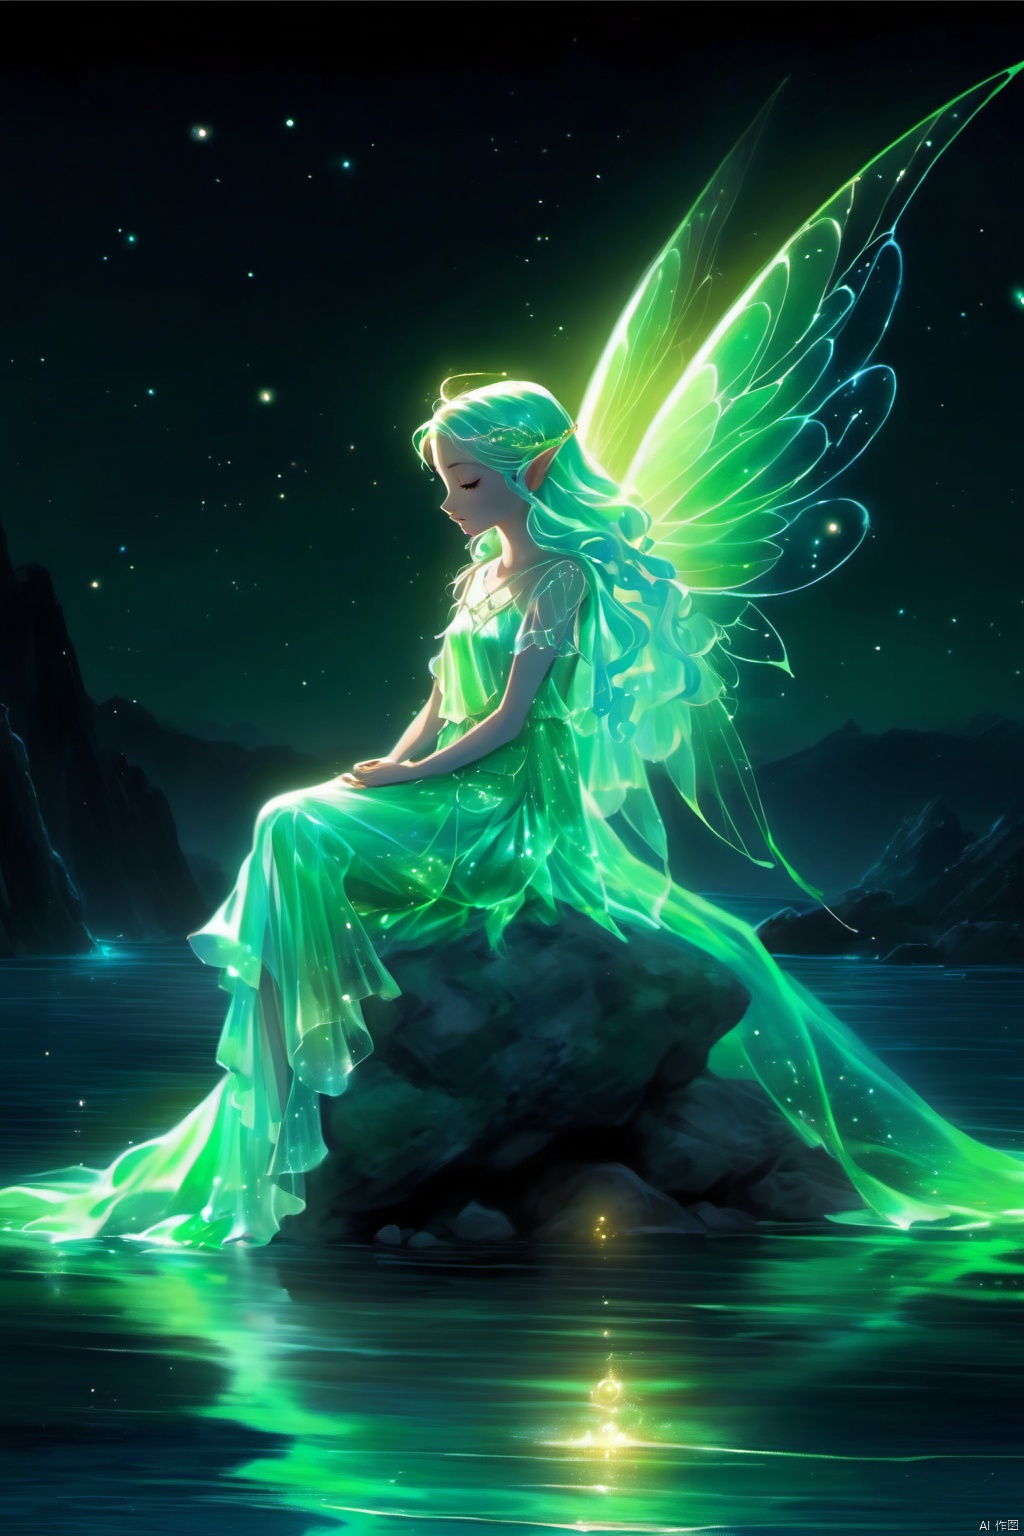  Best quality,8k,cg,
a woman sitting on a rock in the water with a green fairy dress, astral fairy, water fairy, glowing angelic being, beautiful fairy, glowing aura around her, ethereal wings, beautiful fantasy art, very beautiful fantasy art, beautiful fairies, neon wings, ethereal aurora spirits, very beautiful digital art, beautiful digital art, elven angel meditating in space